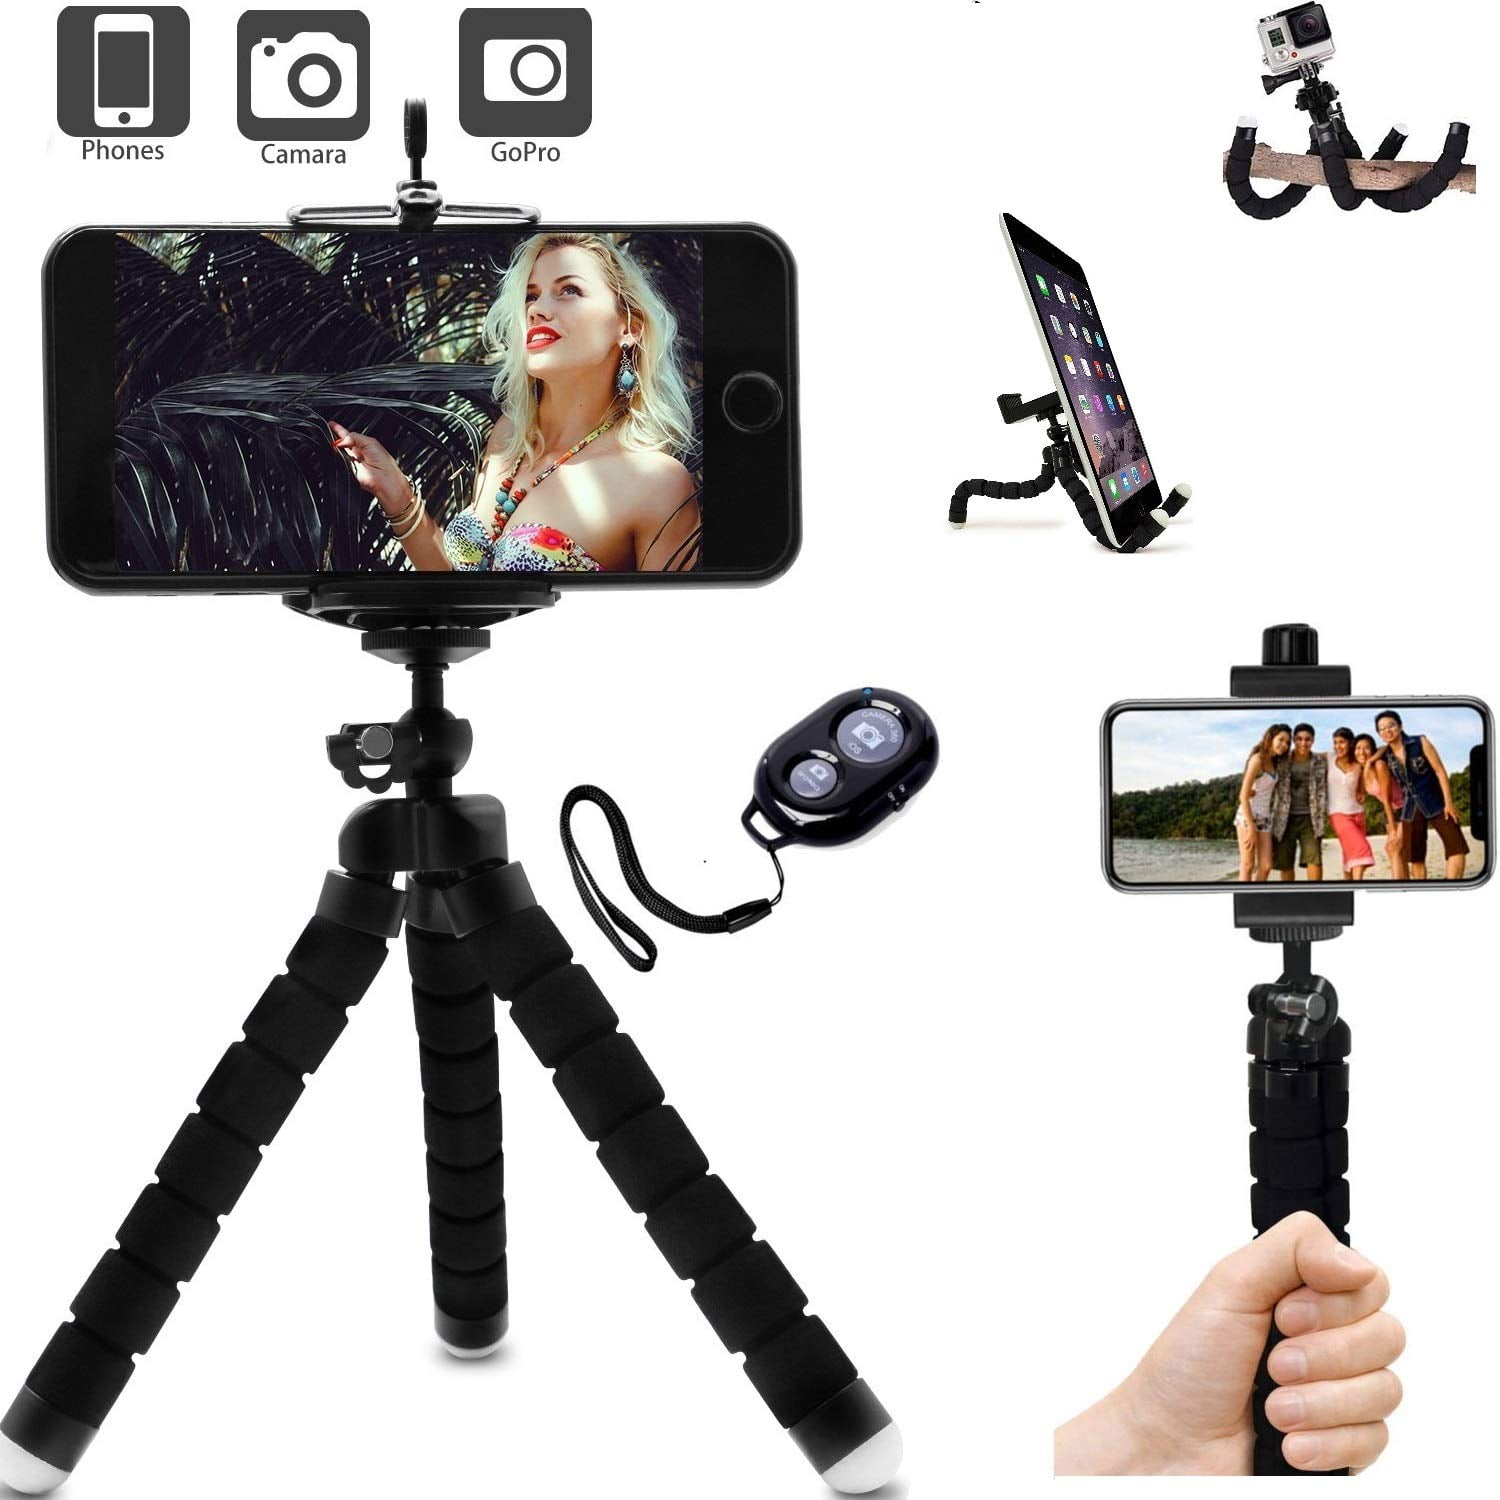 Phone Tripod,Upgraded iPhone Tripod with Wireless Remote Shutter Compatible  with iPhone/Android Samsung, Mini Tripod Stand Holder for Camera